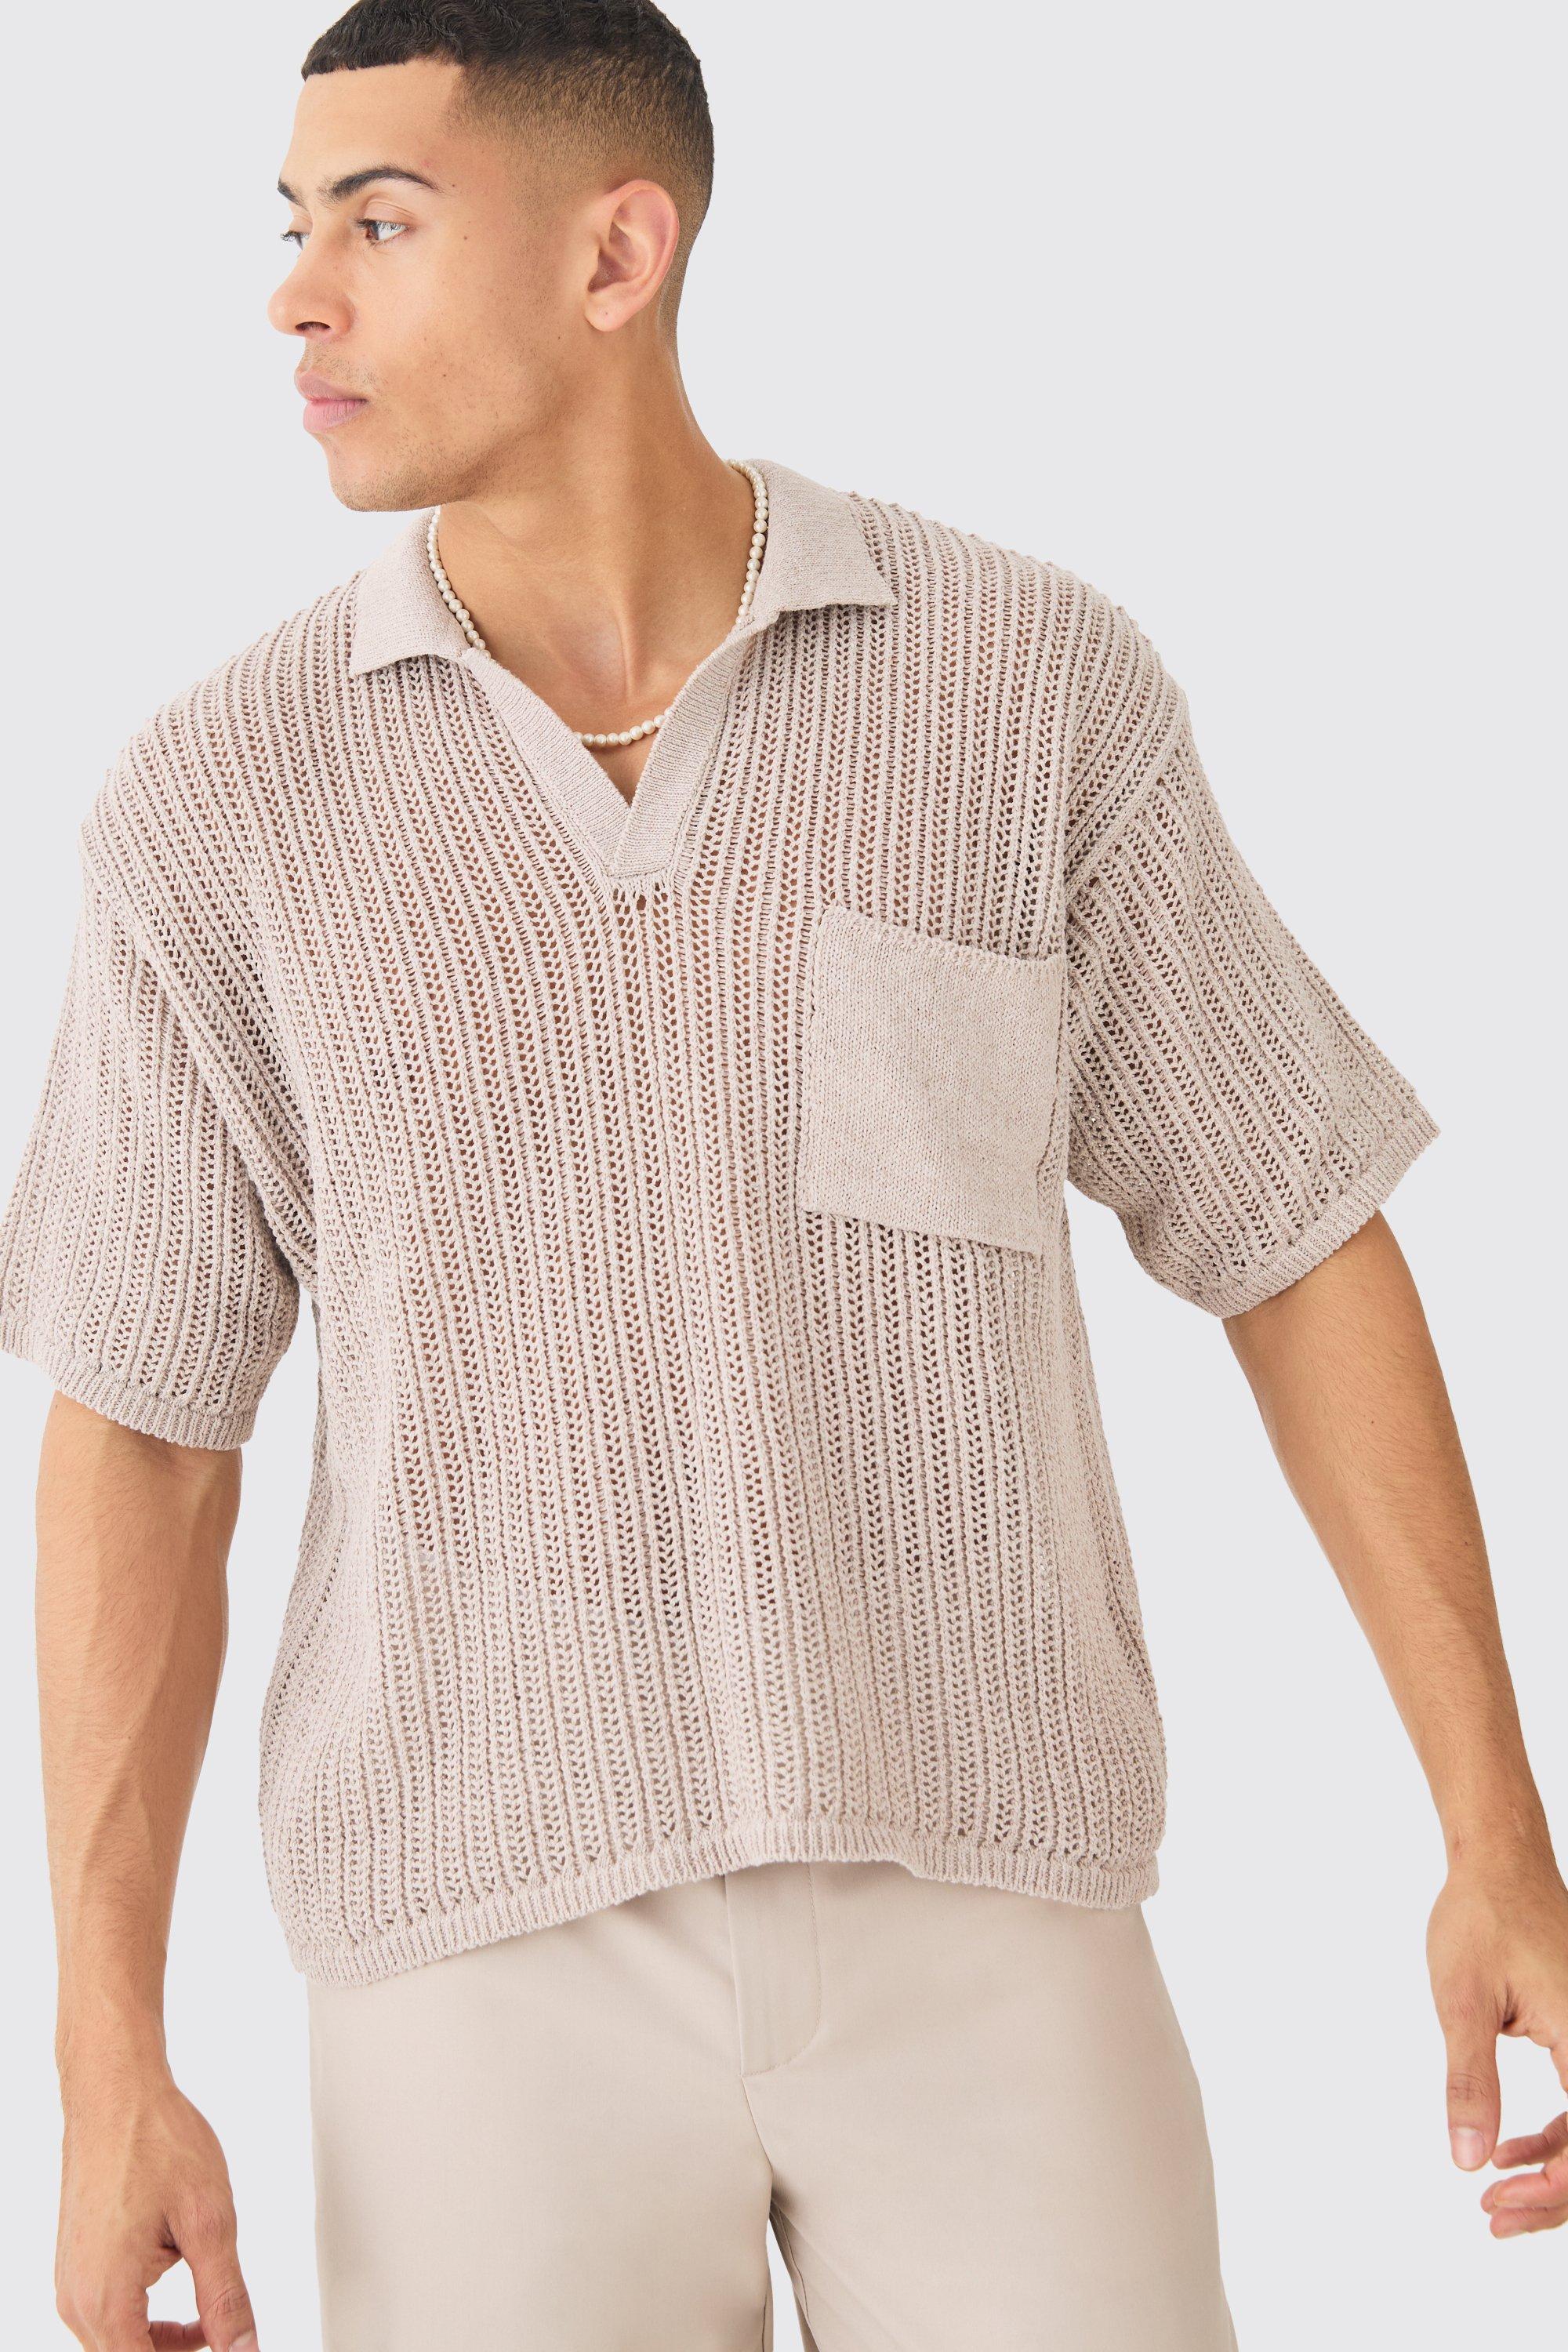 Image of Oversized Boxy Open Stitch Polo With Pocket In Stone, Beige